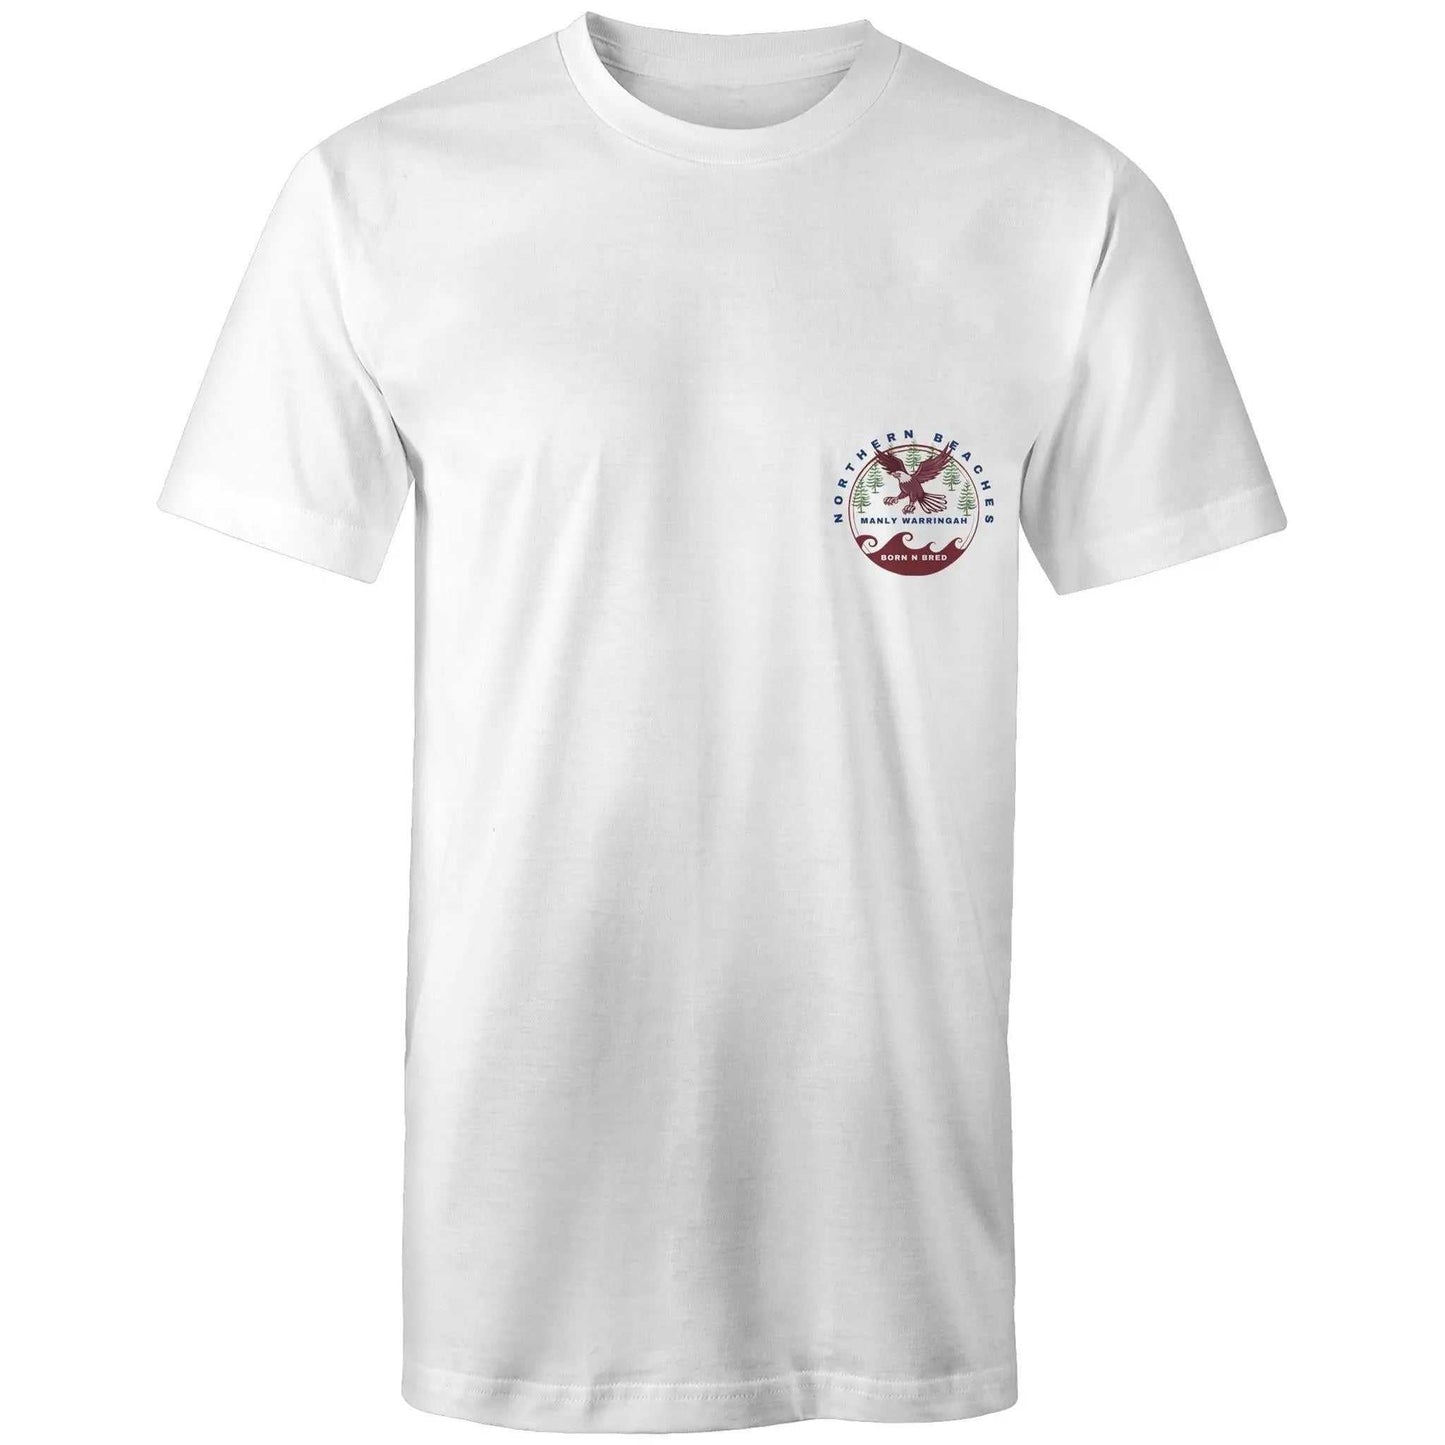 Tall Tee Shirt logo front and back Northern Beaches Manly Warringah BornNBred Navy font